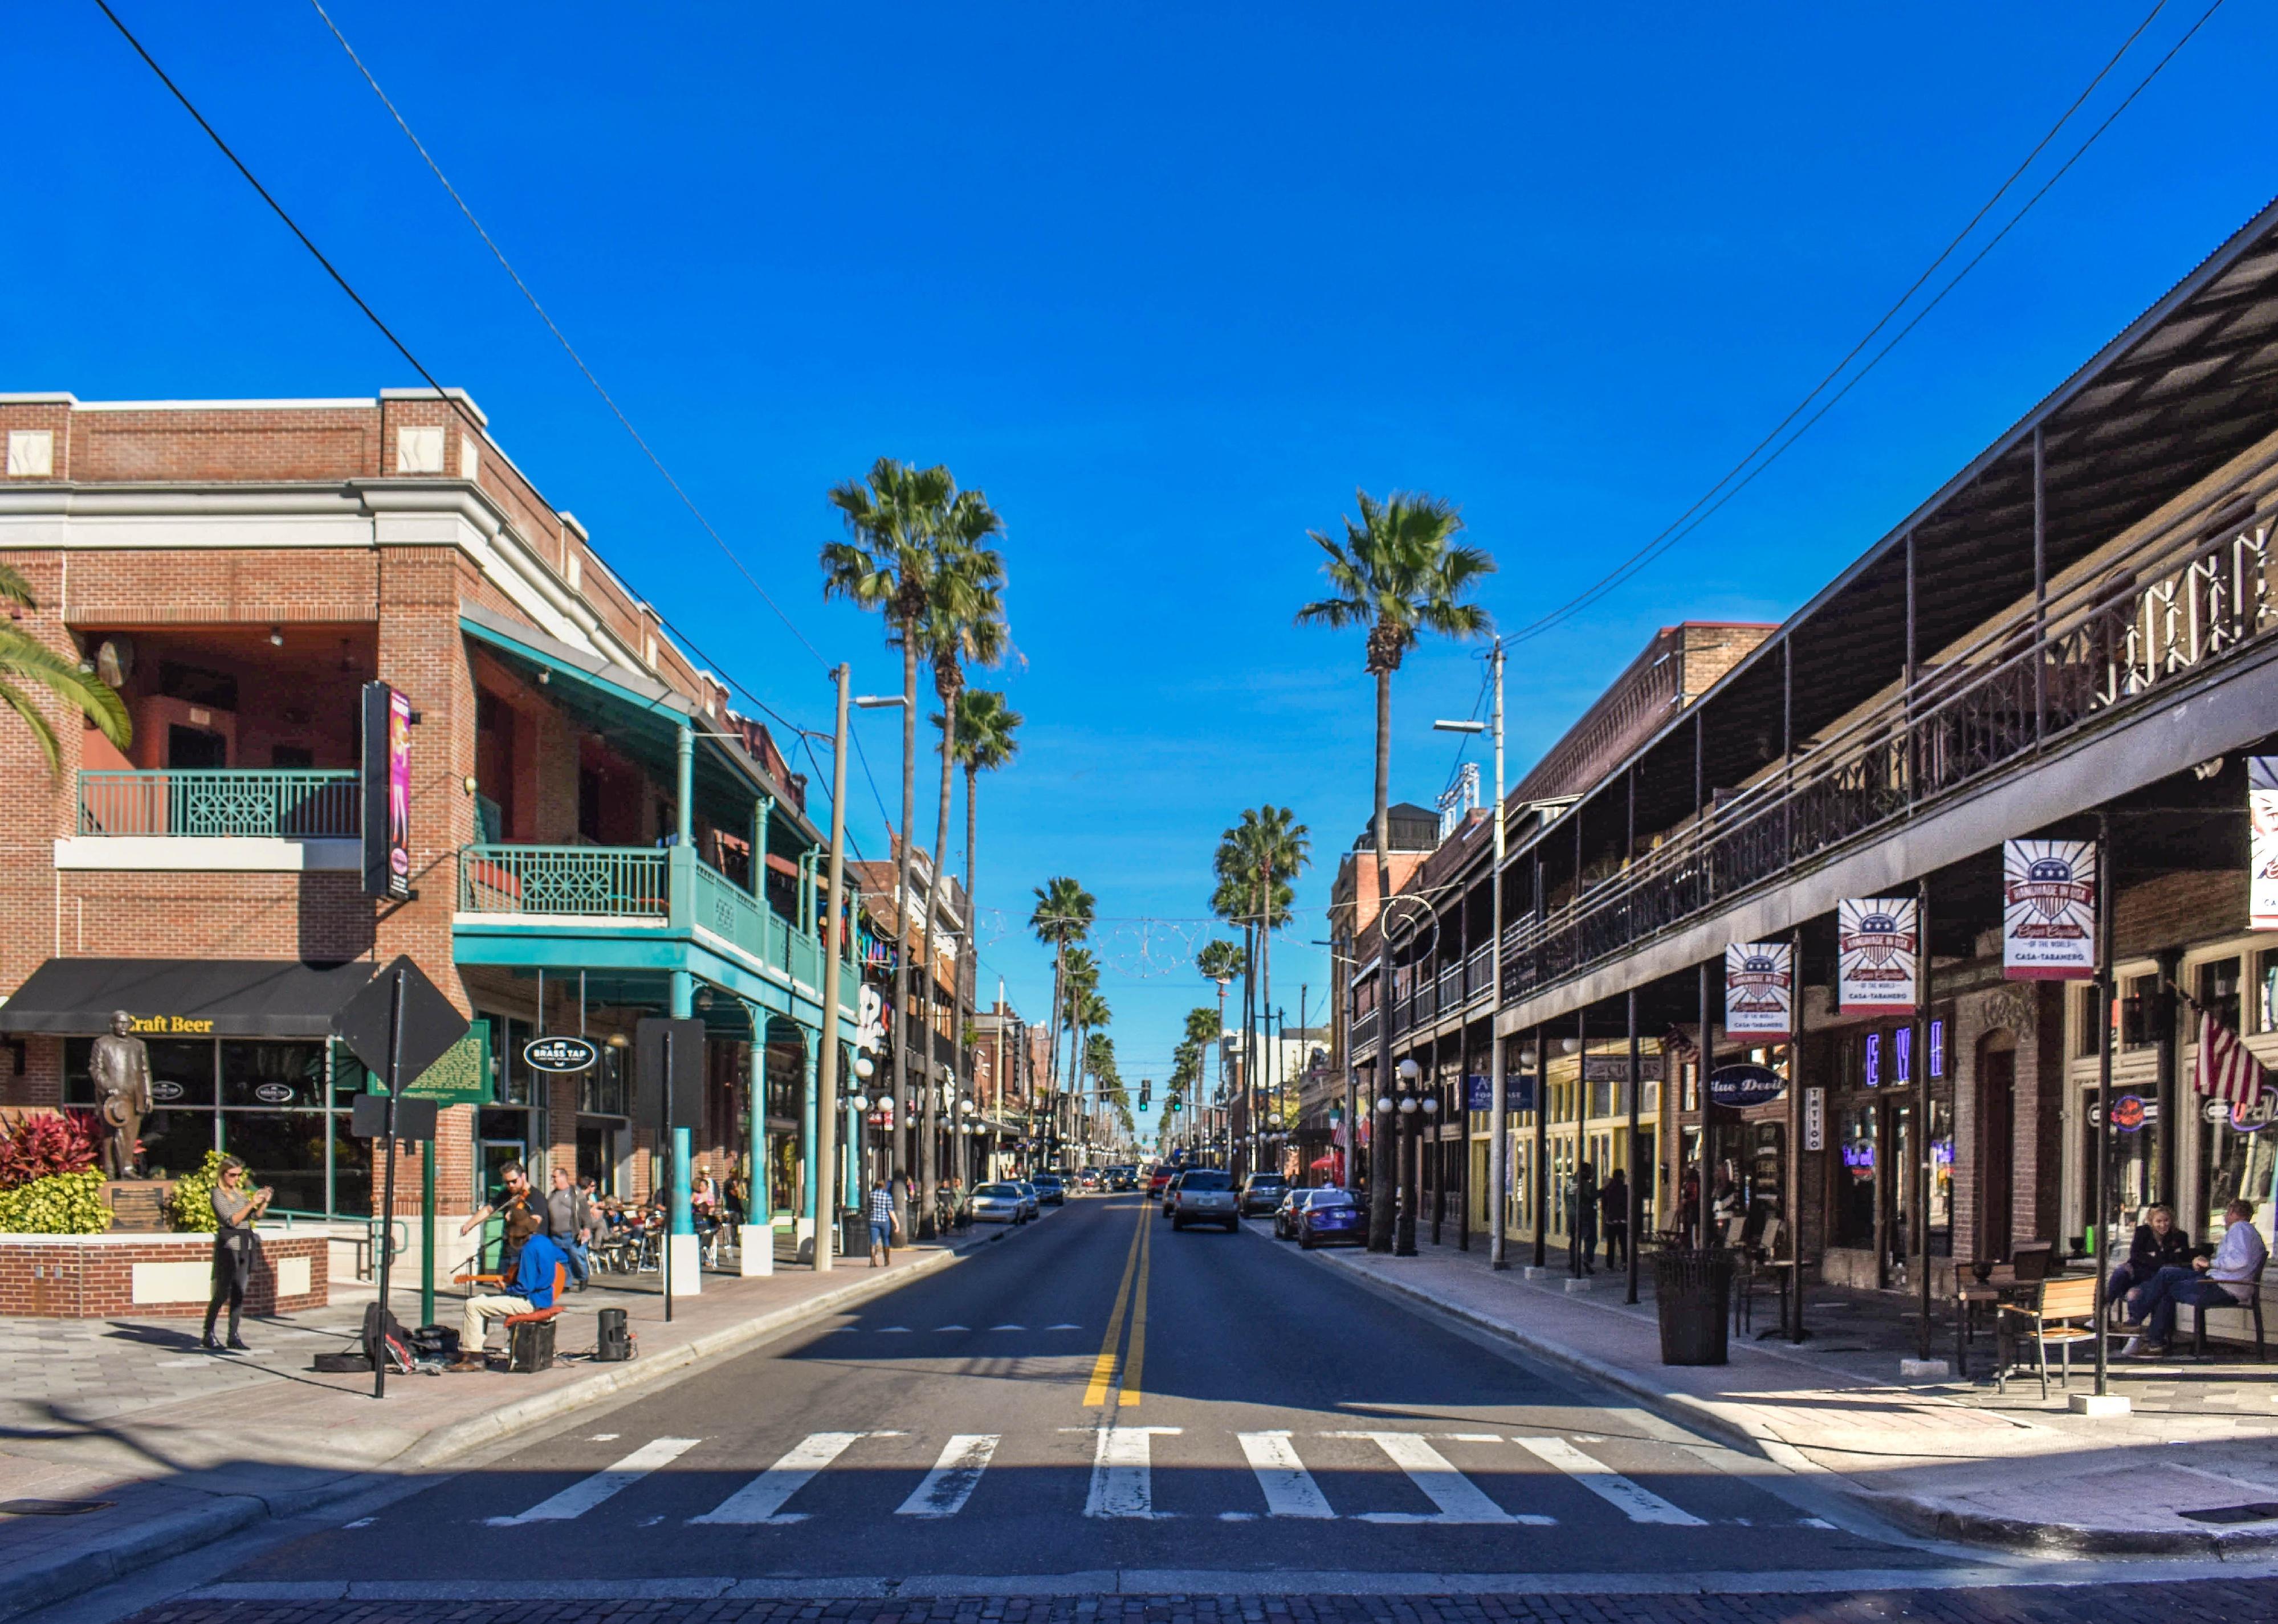 A city street lined with palm trees in Tampa.